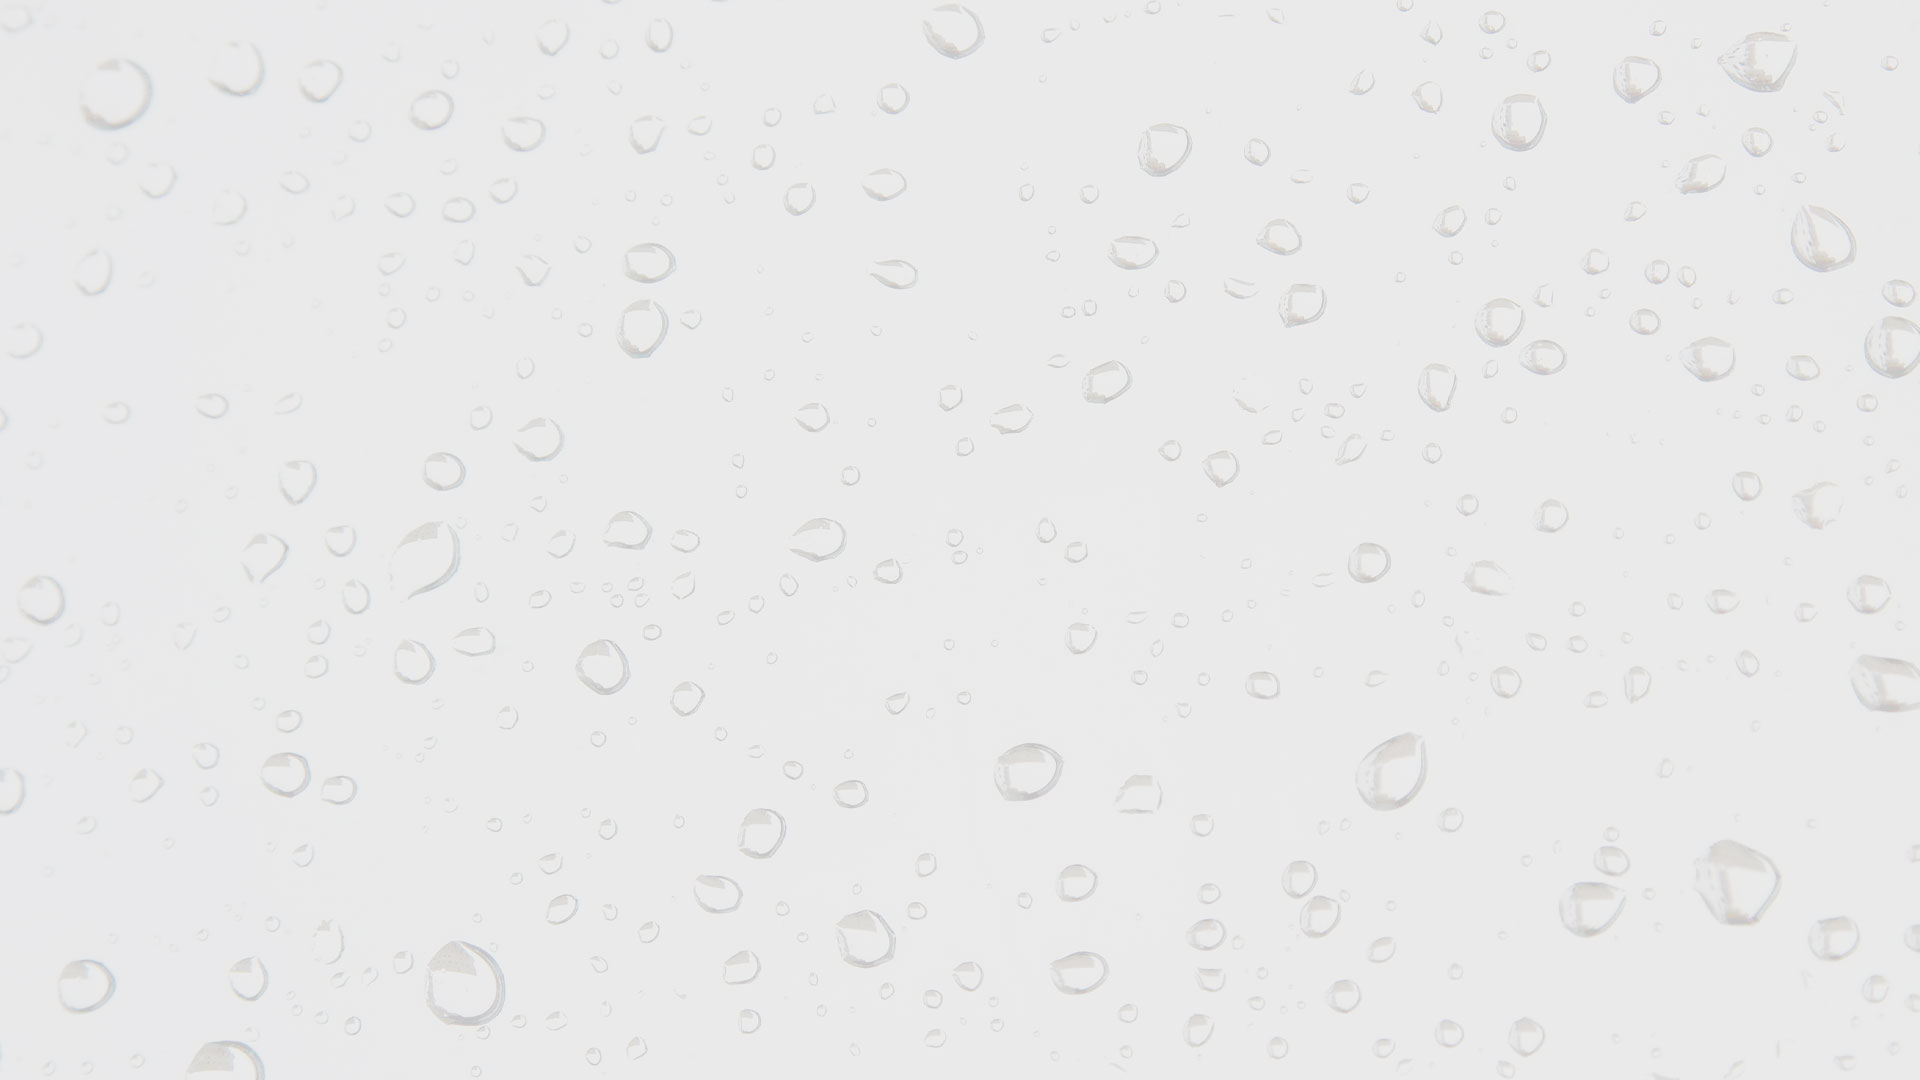 Water Droplets Background Image